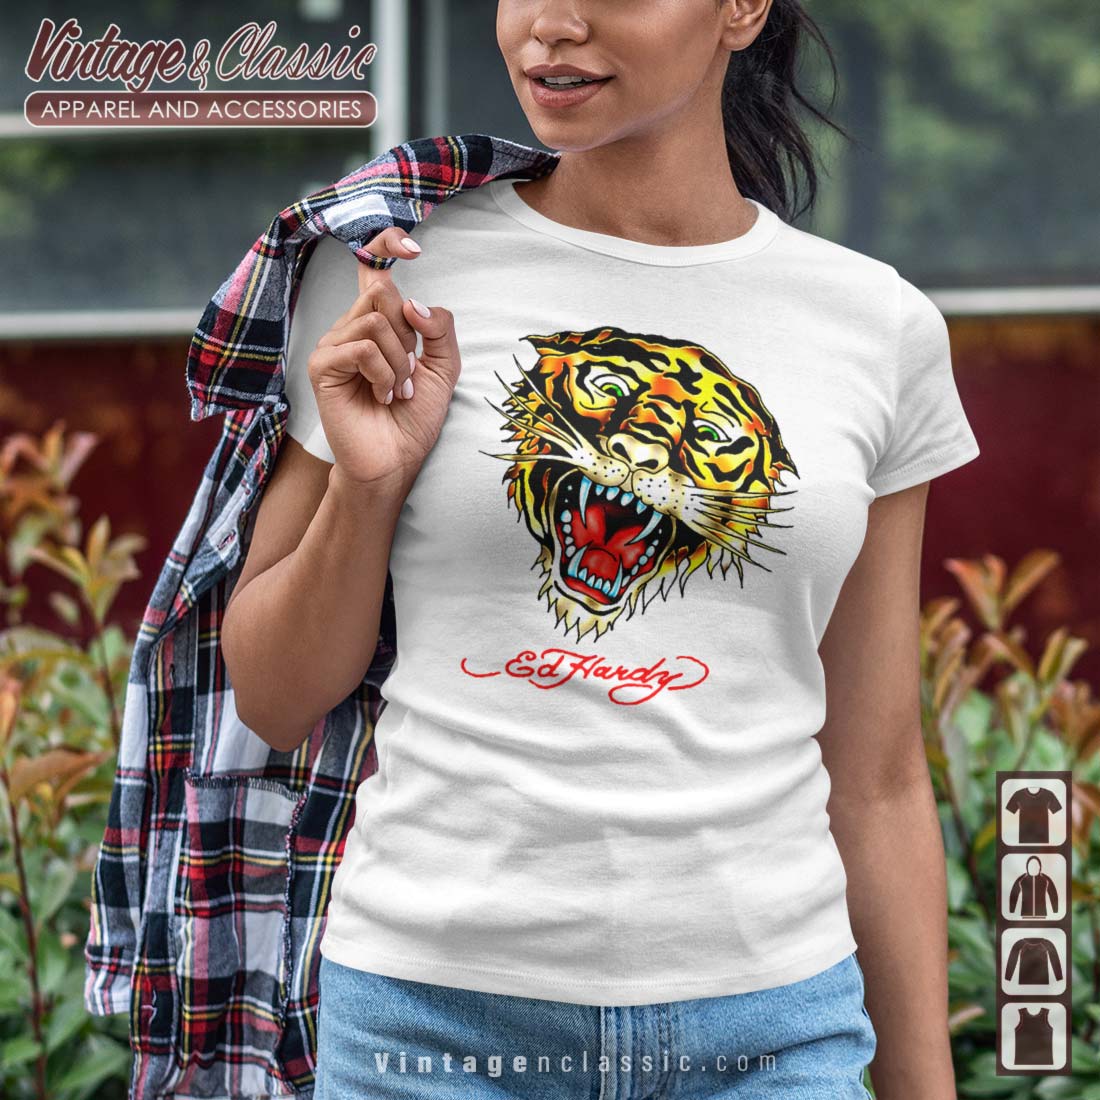 Badass Babe: Ed Hardy T-Shirts That Will Make You Look Hot AF